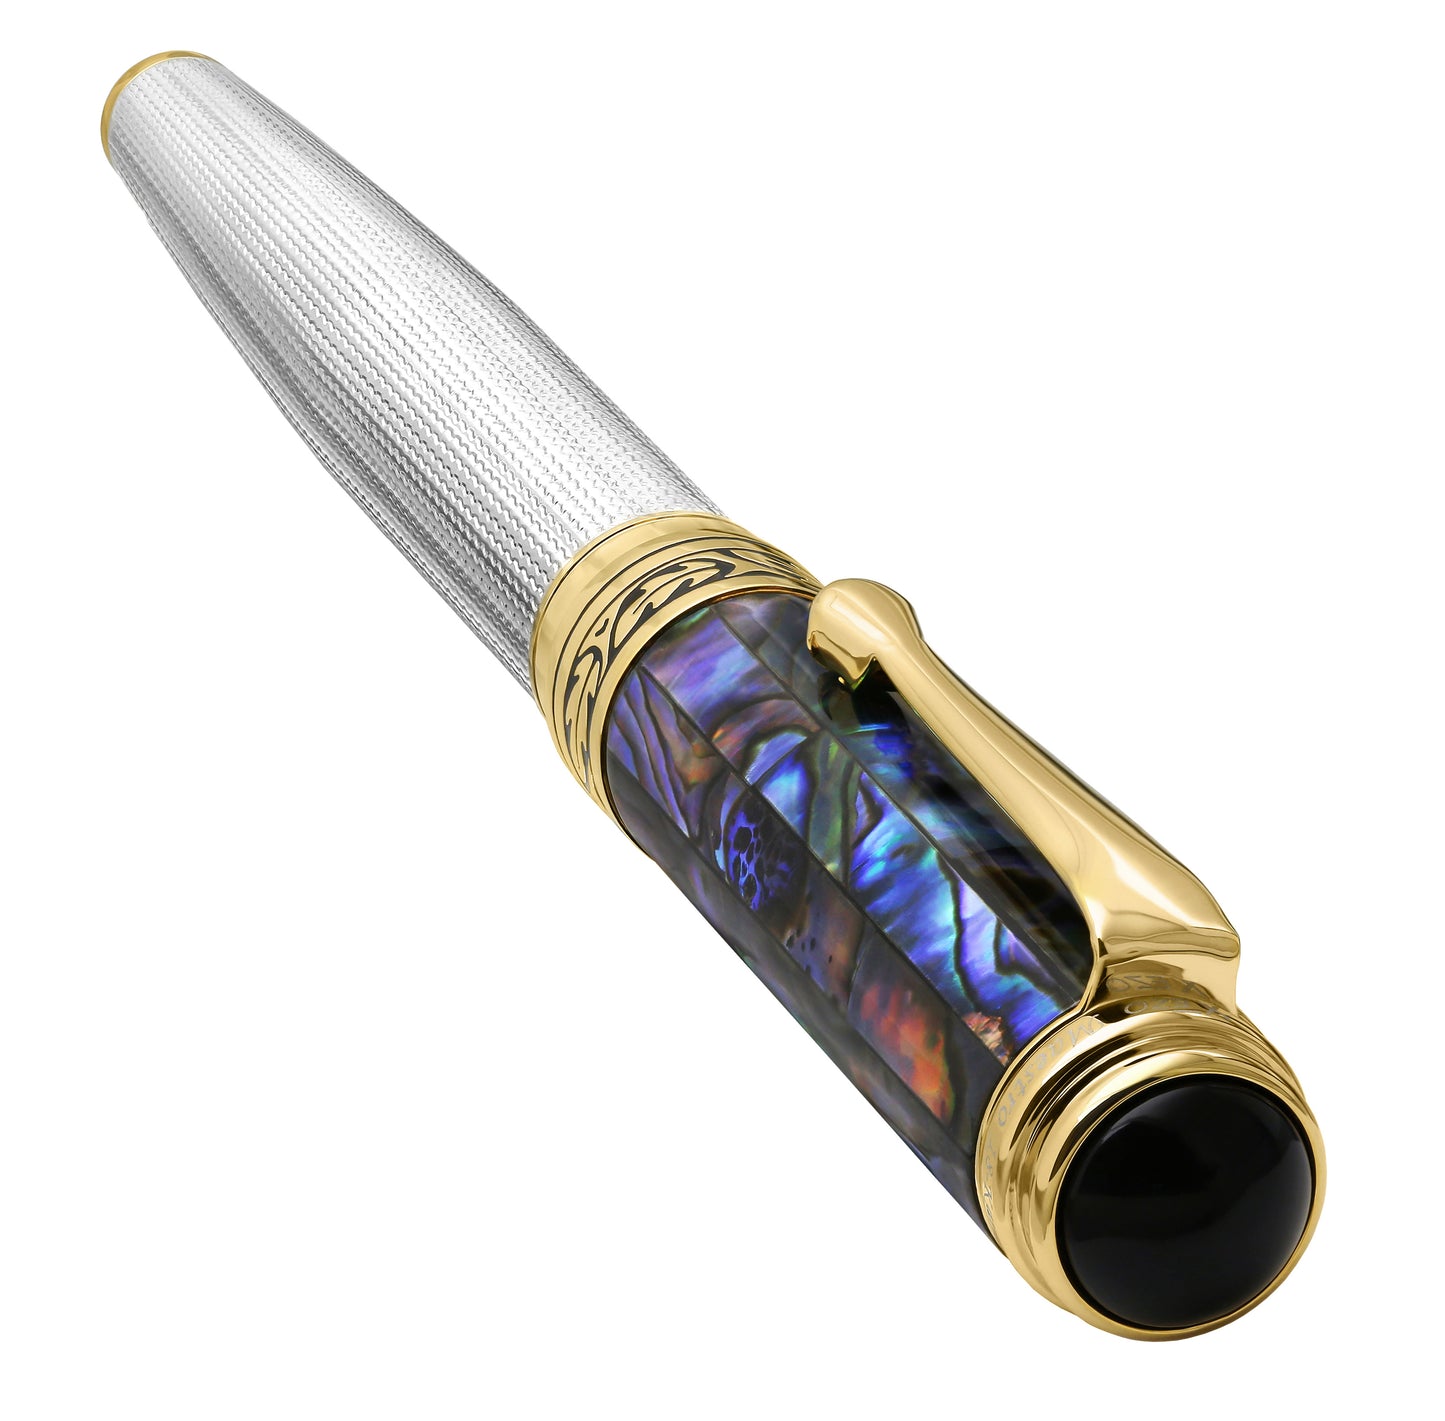 Xezo - Angled 3D view of the back of a capped Maestro 925 Sea Shell F fountain pen